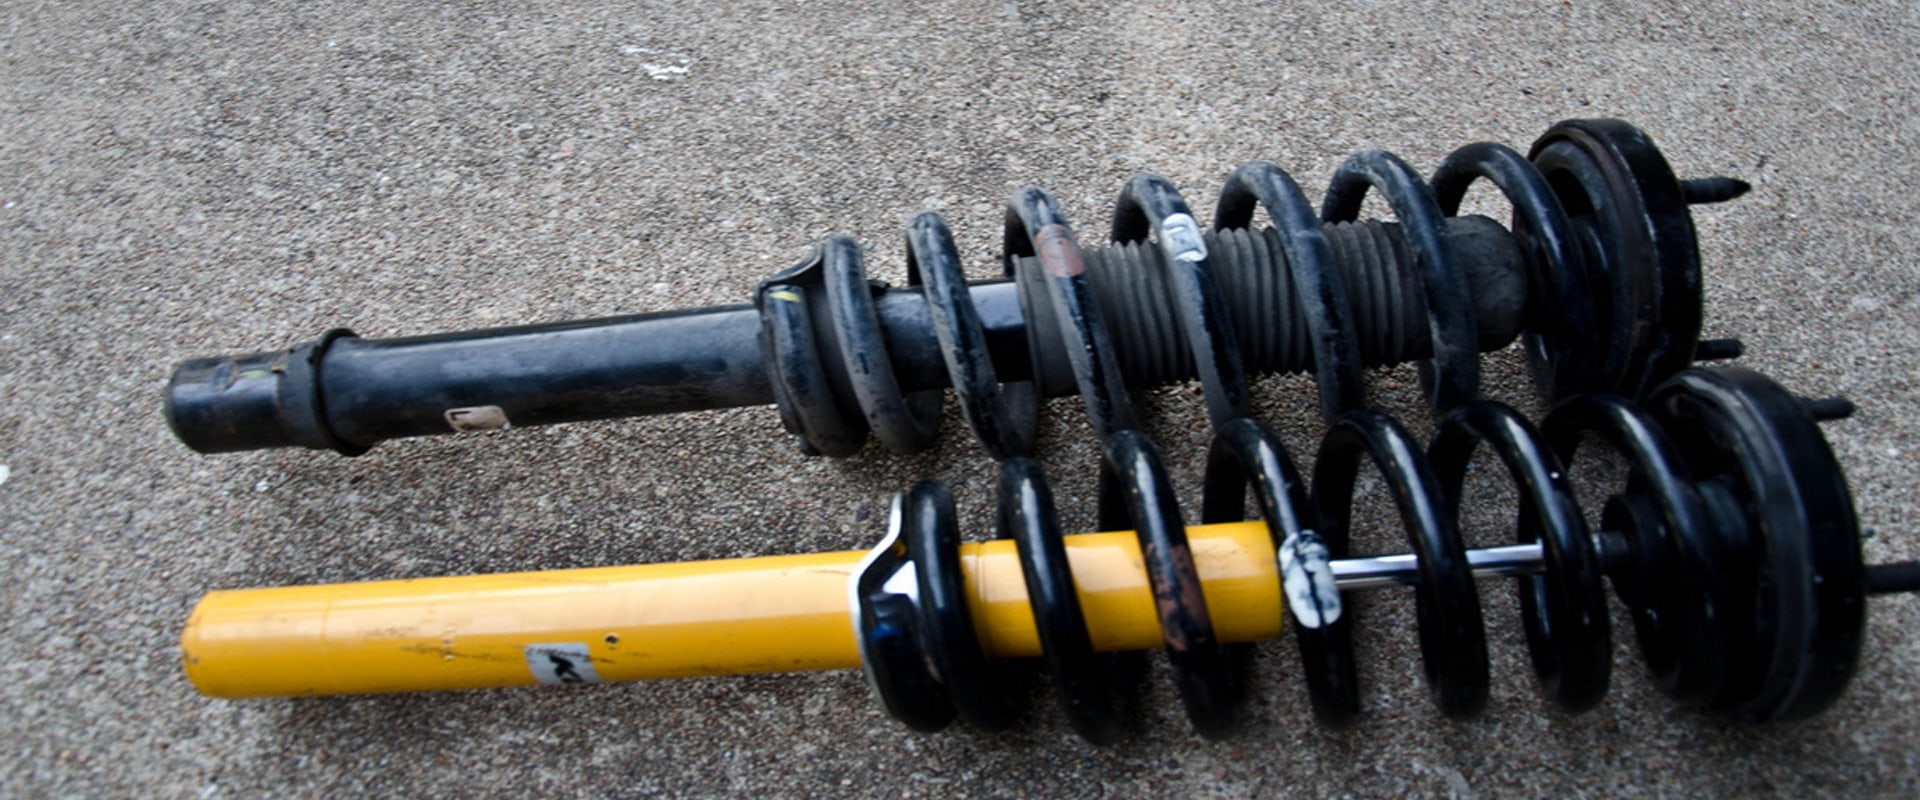 Shocks and Struts: An Introduction to Suspension Modifications